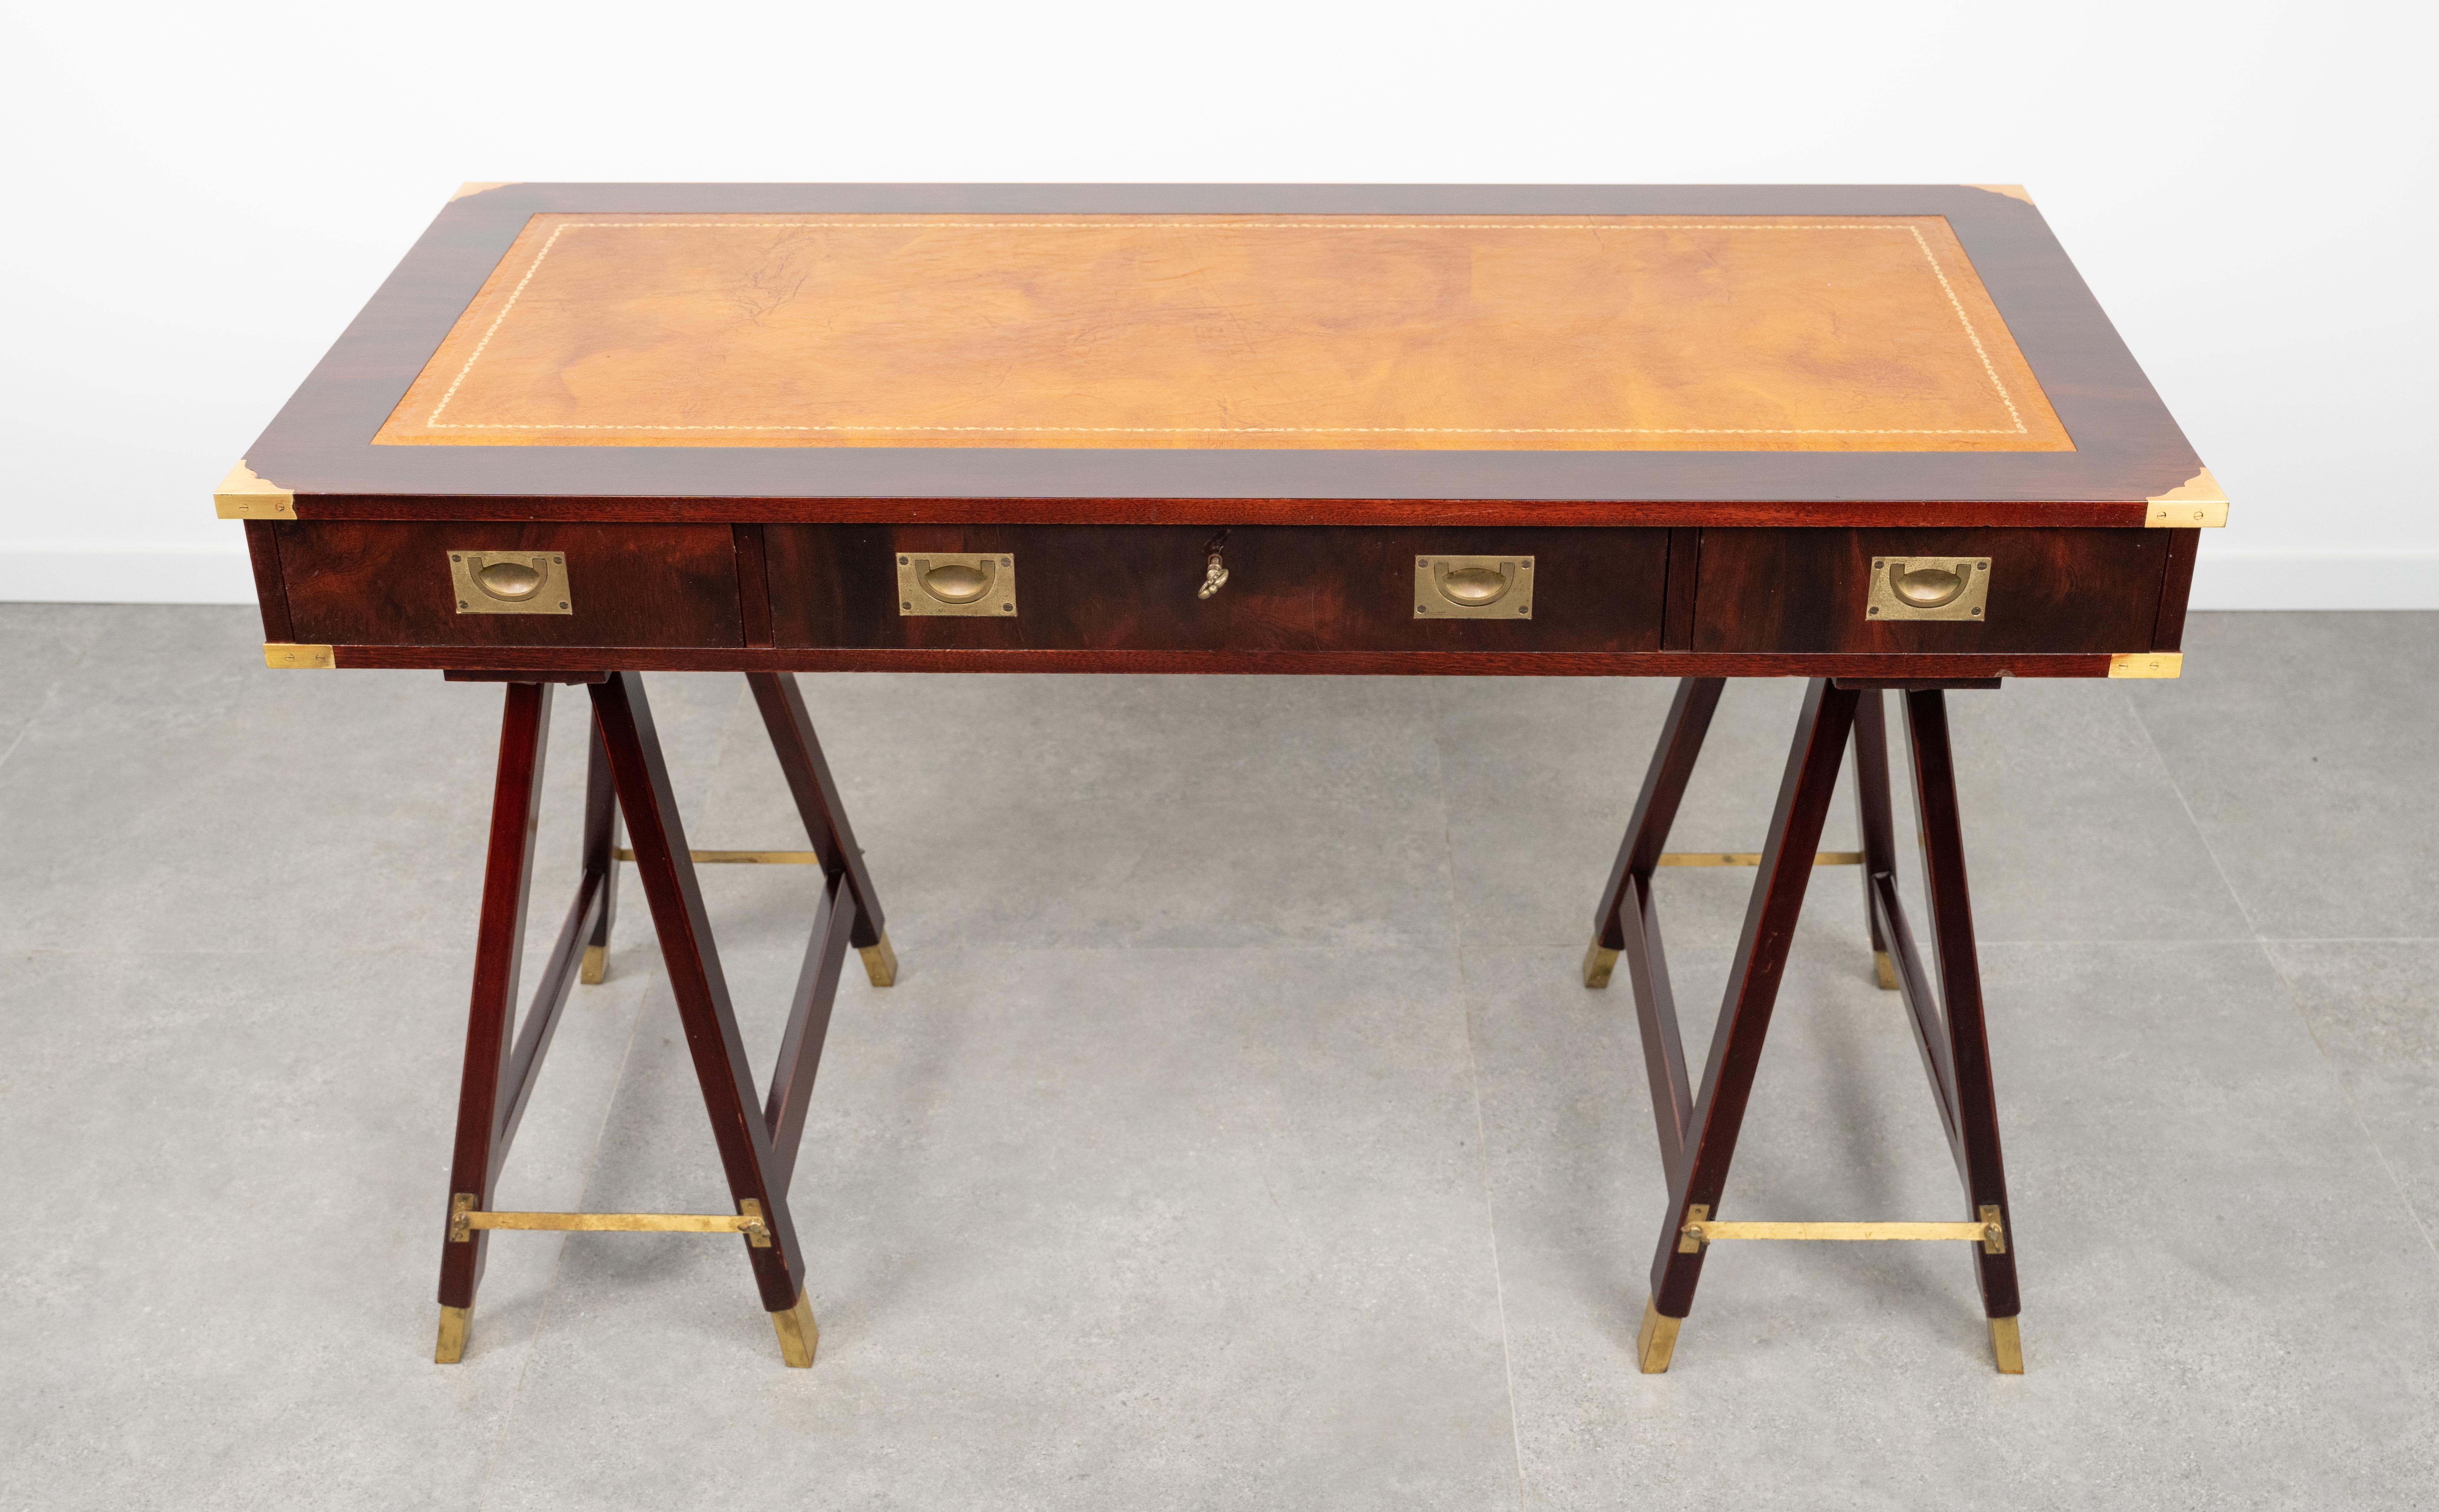 Amazing desk table  in the antique military campaign style in wood, brass and leather top with three drawers by Sea Line Orvieto.

Made in Italy in the 1960s.

It has three good size drawers with brass handles and fixtures.

The trestle base is a